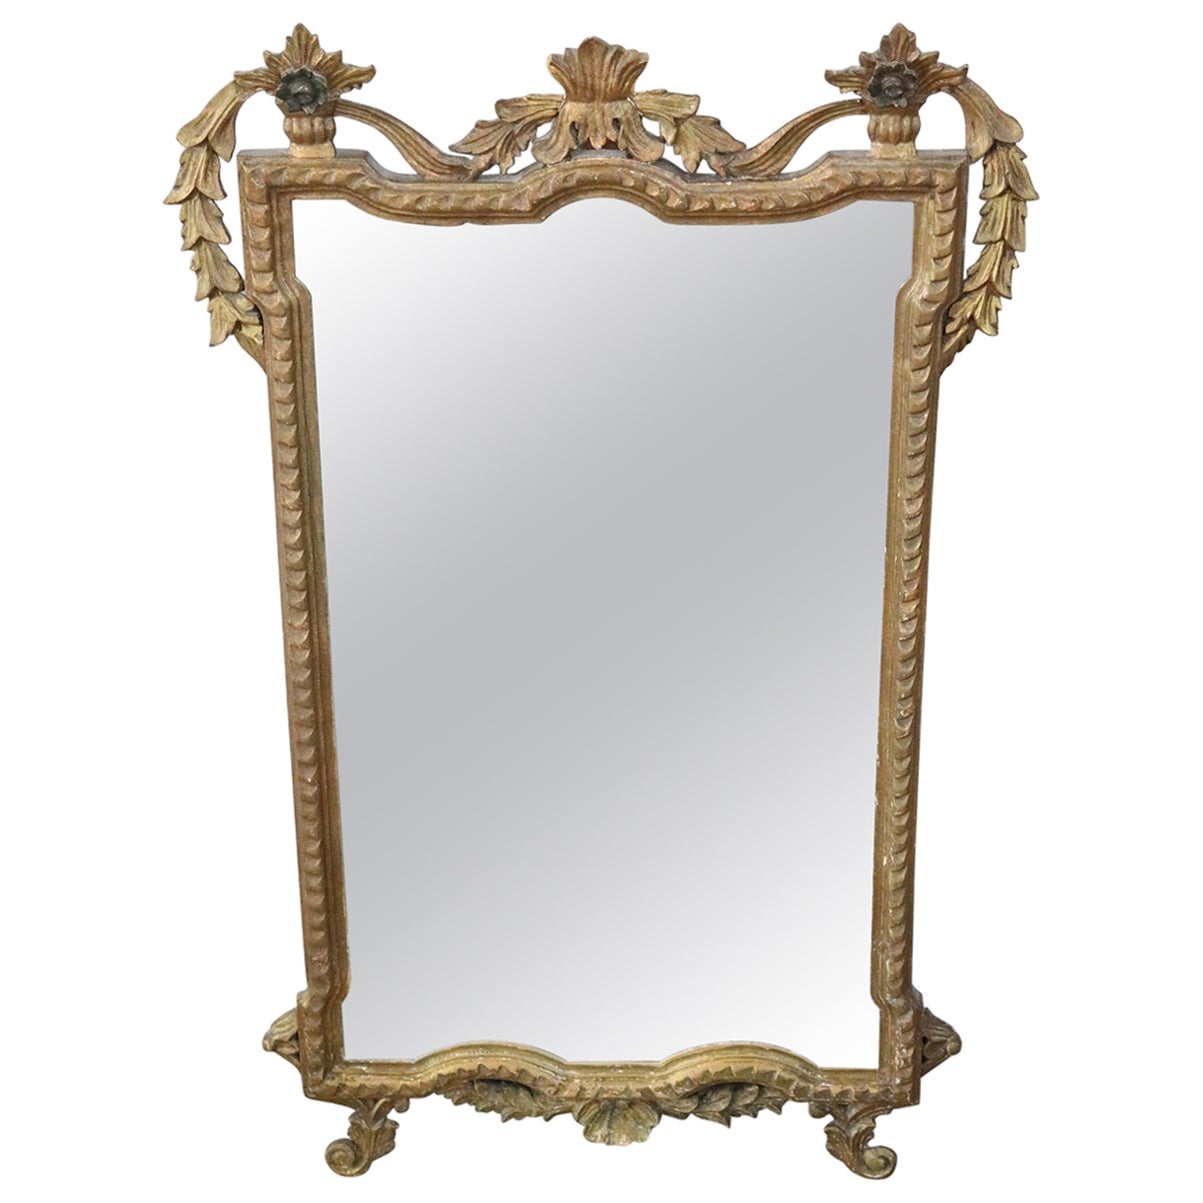 Early 20th Century Italian Louis XVI Style Carved and Gilded Wood Wall Mirror For Sale